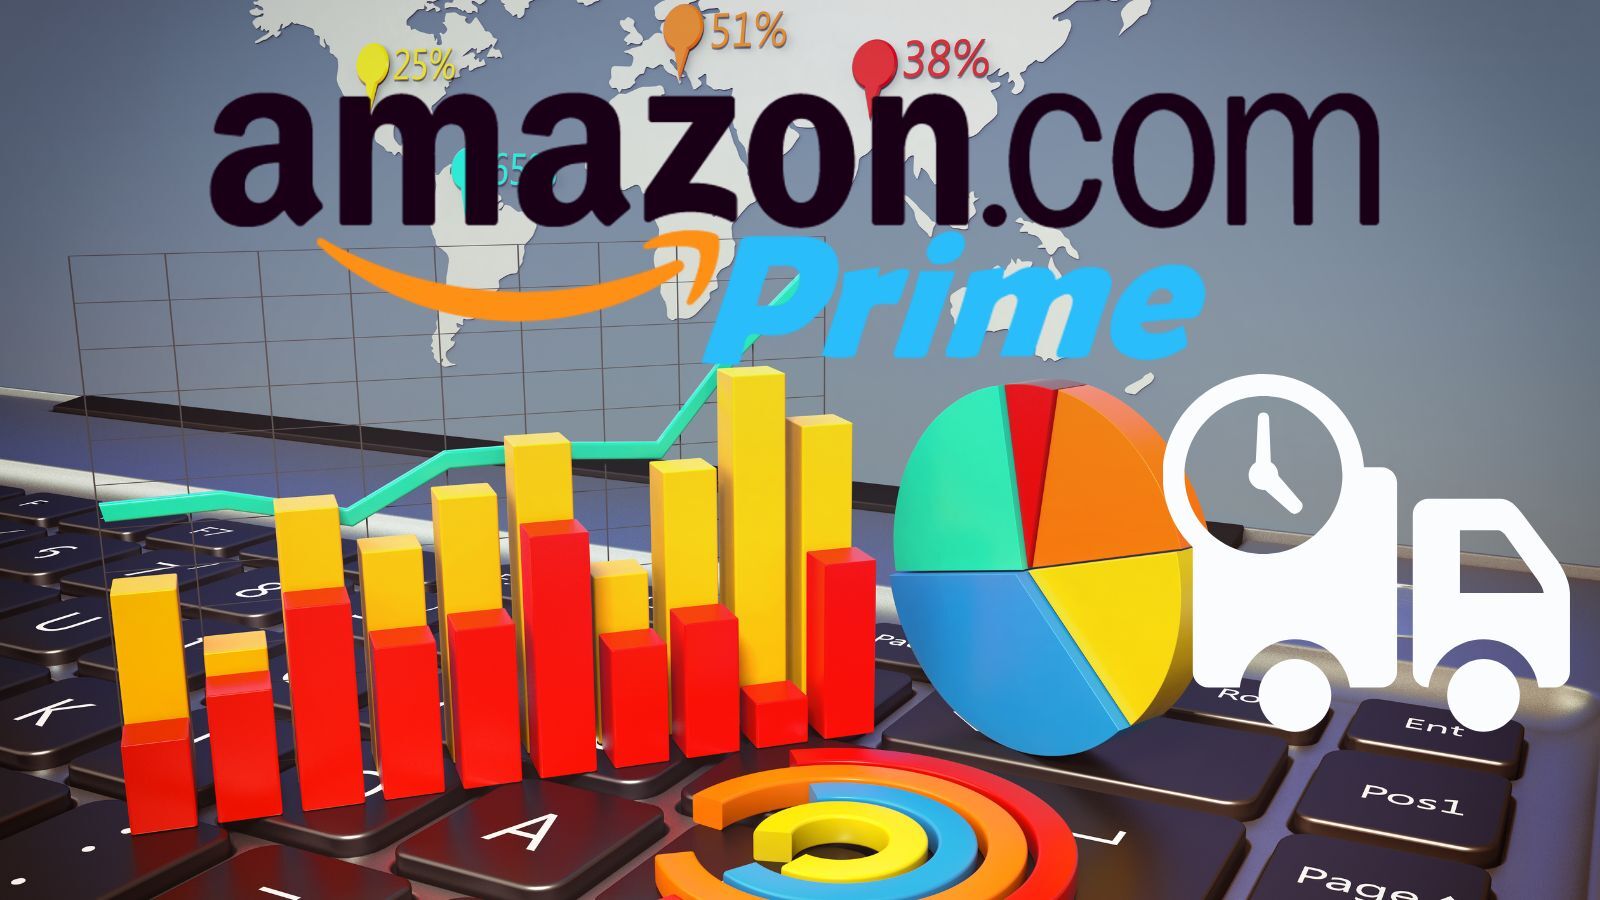 Amazon Prime Statistics 2022: How Many Amazon Prime Members are There?